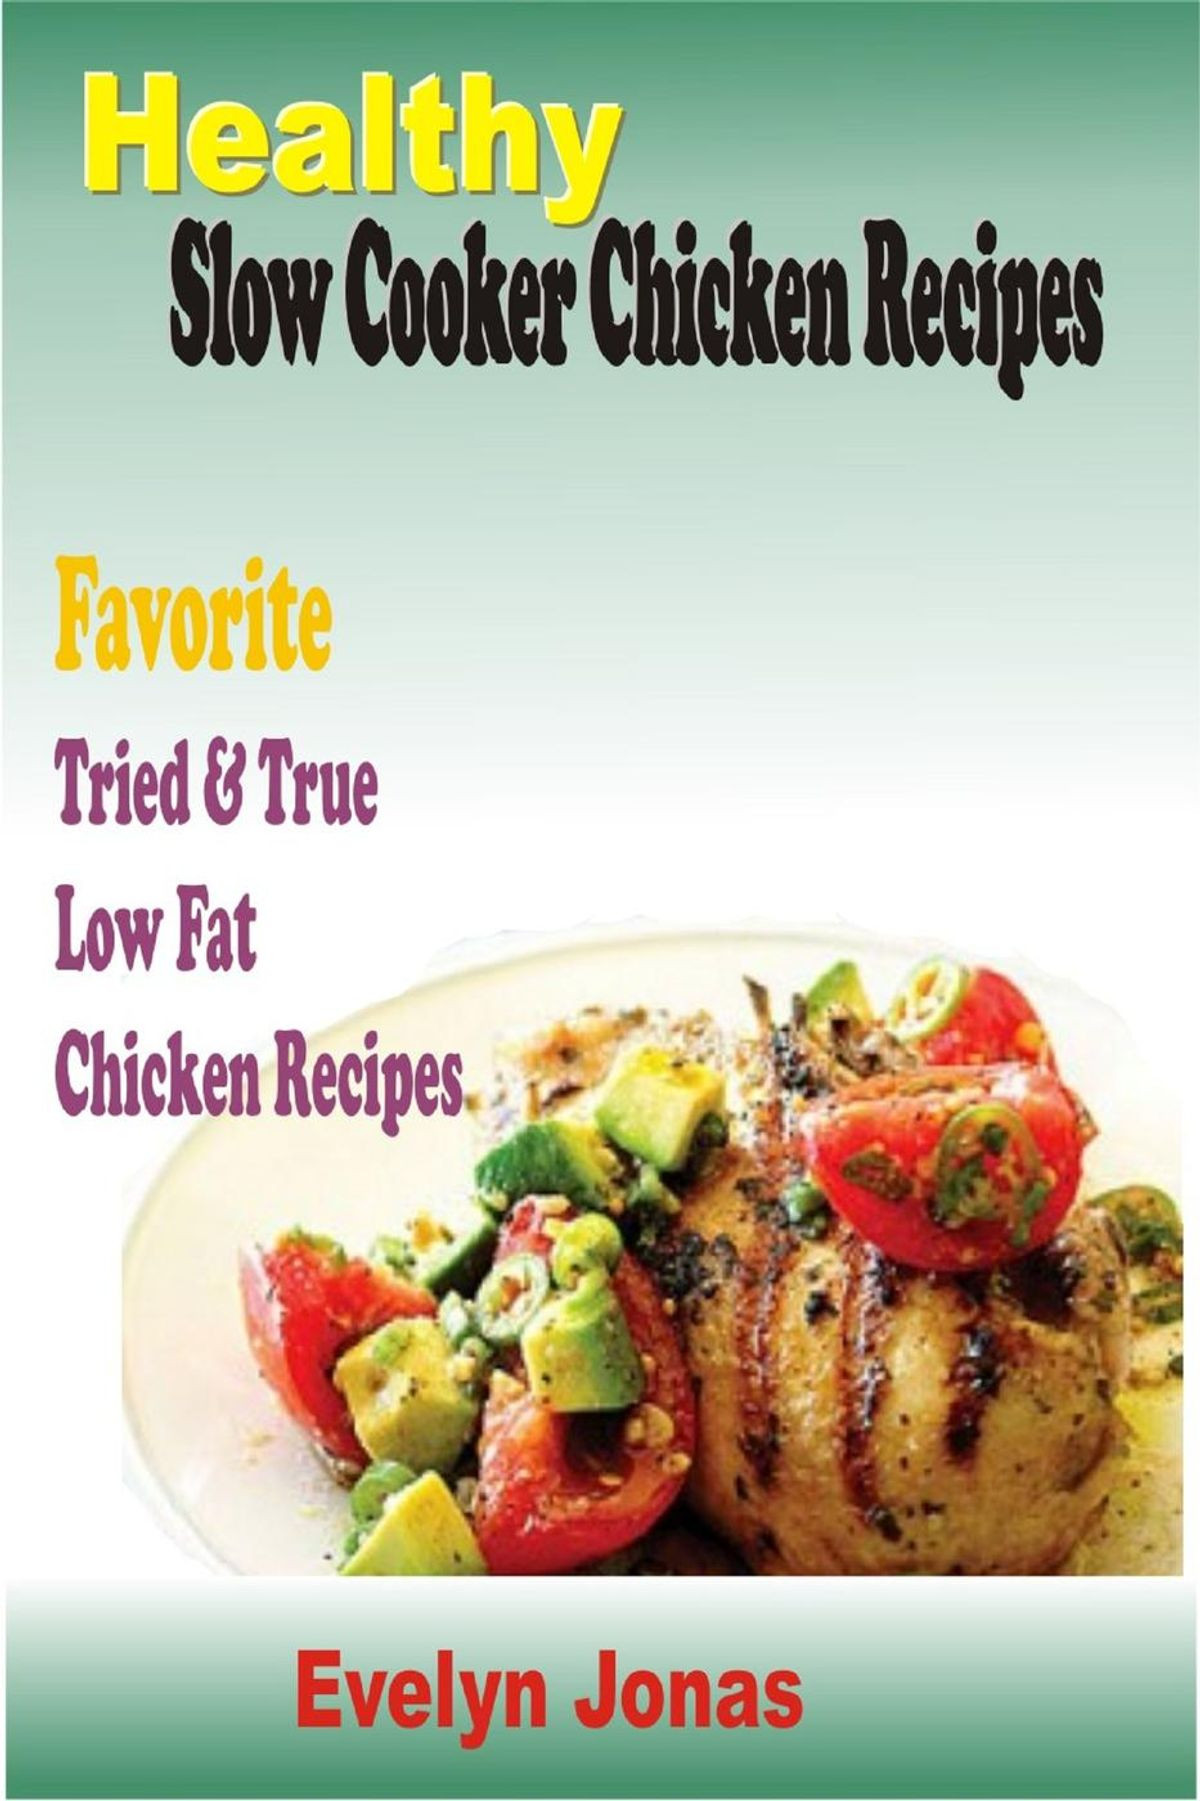 Healthy Low Fat Chicken Recipes
 Healthy Slow Cooker Chicken Recipes Favorite Tried & True